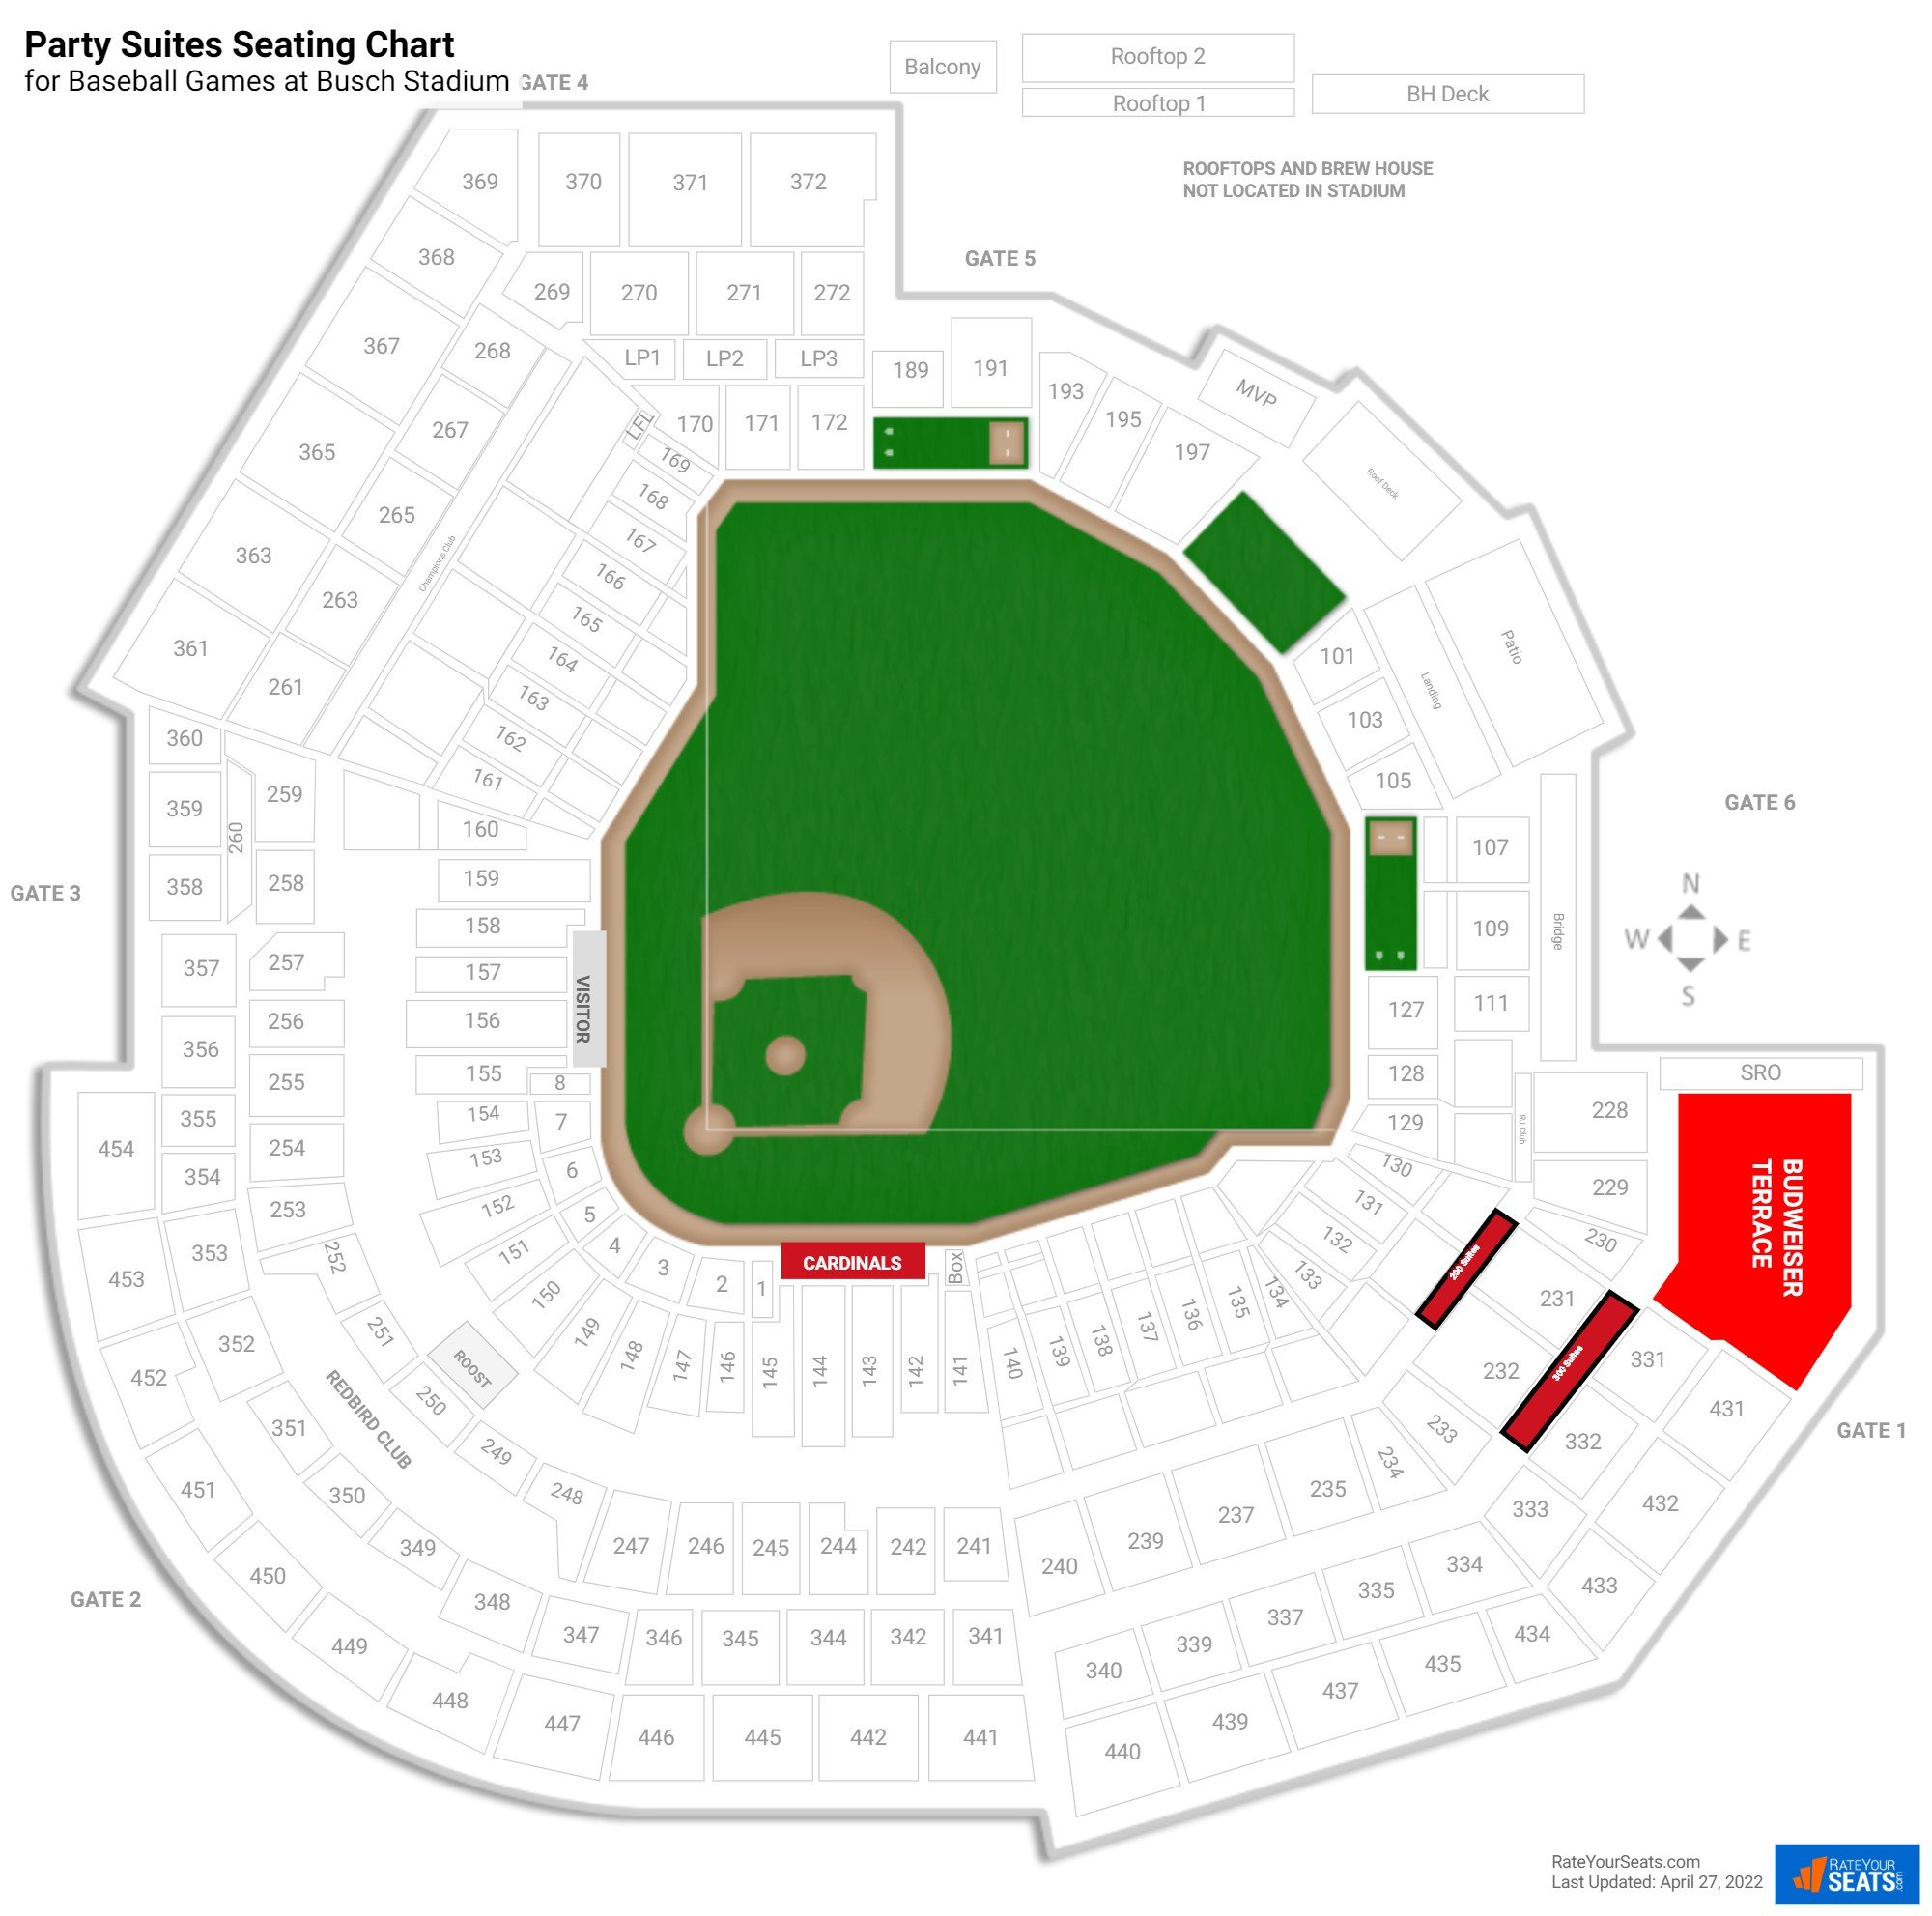 Baseball Party Suites Seating Chart at Busch Stadium